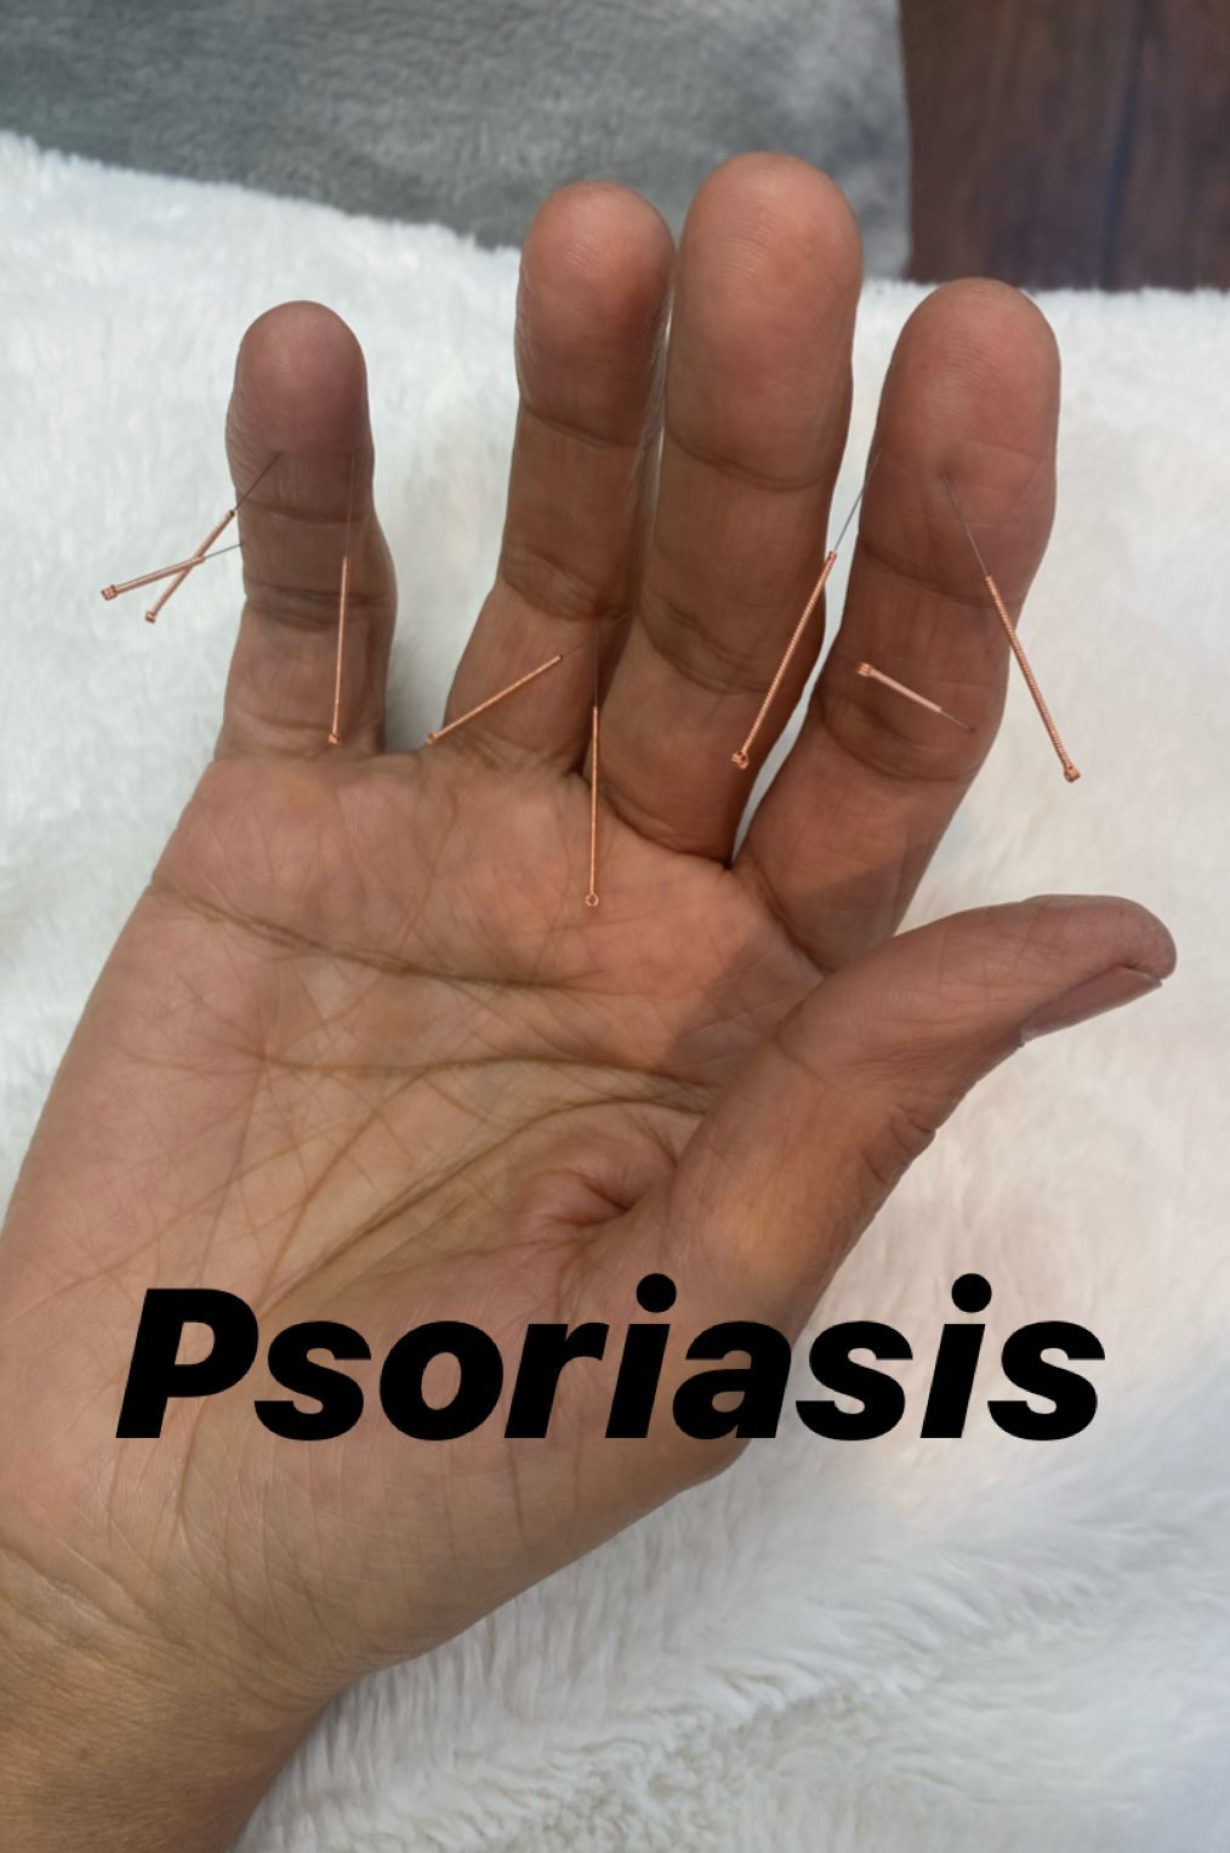  SuJok acupuncture treatments based in Vancouver used for skin issues and conditions. Patient in this case received treatment for psoriasis 